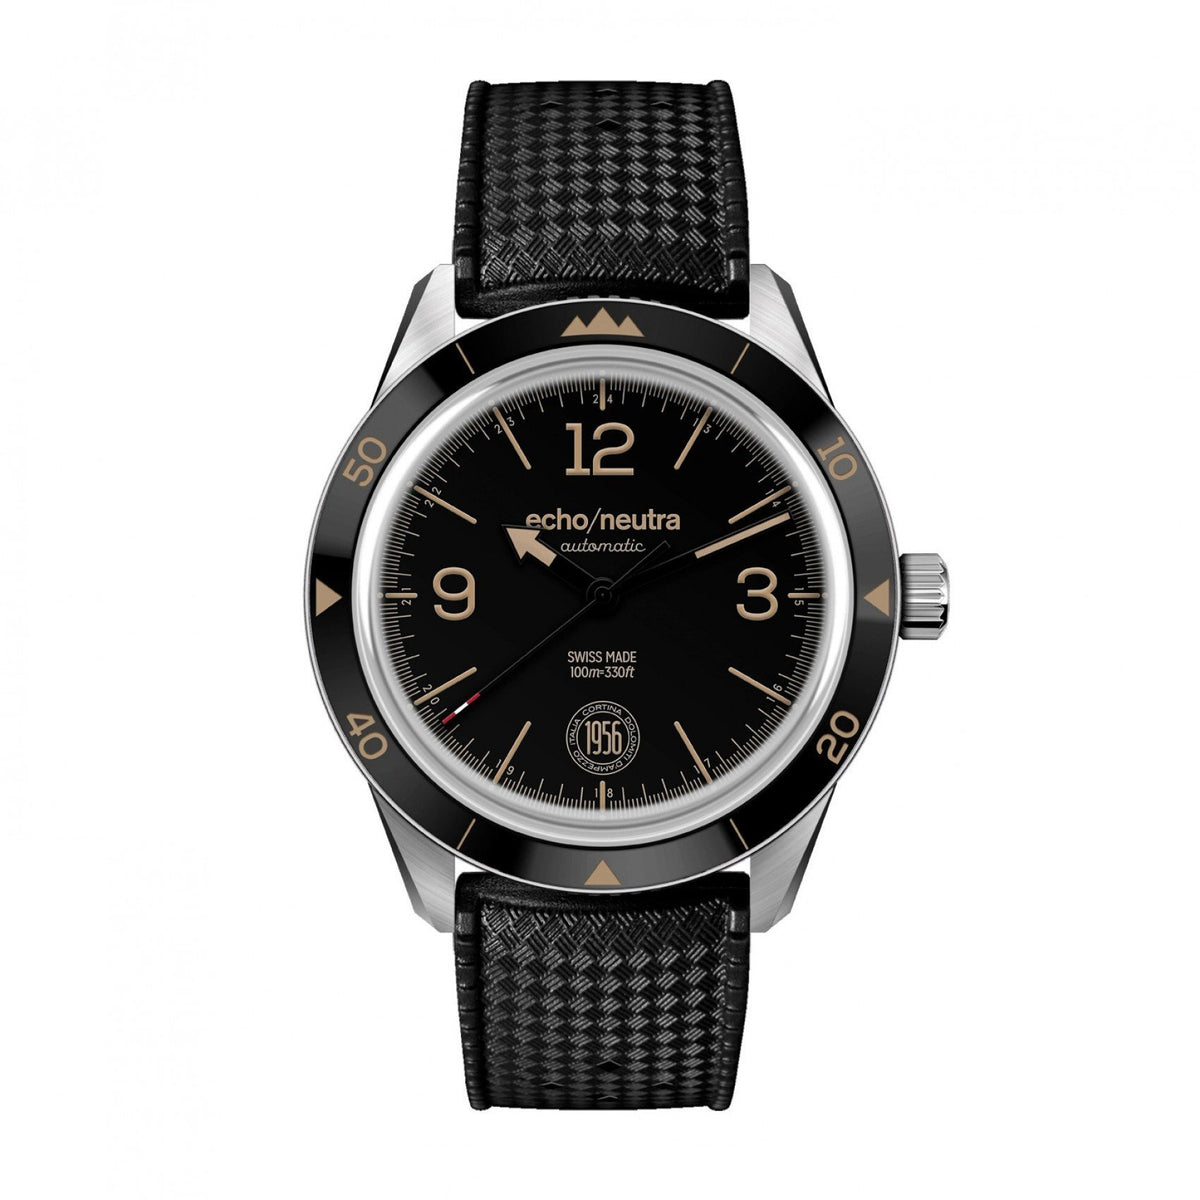 echo/neutral Cortina 1956 | Only time Black 11108 